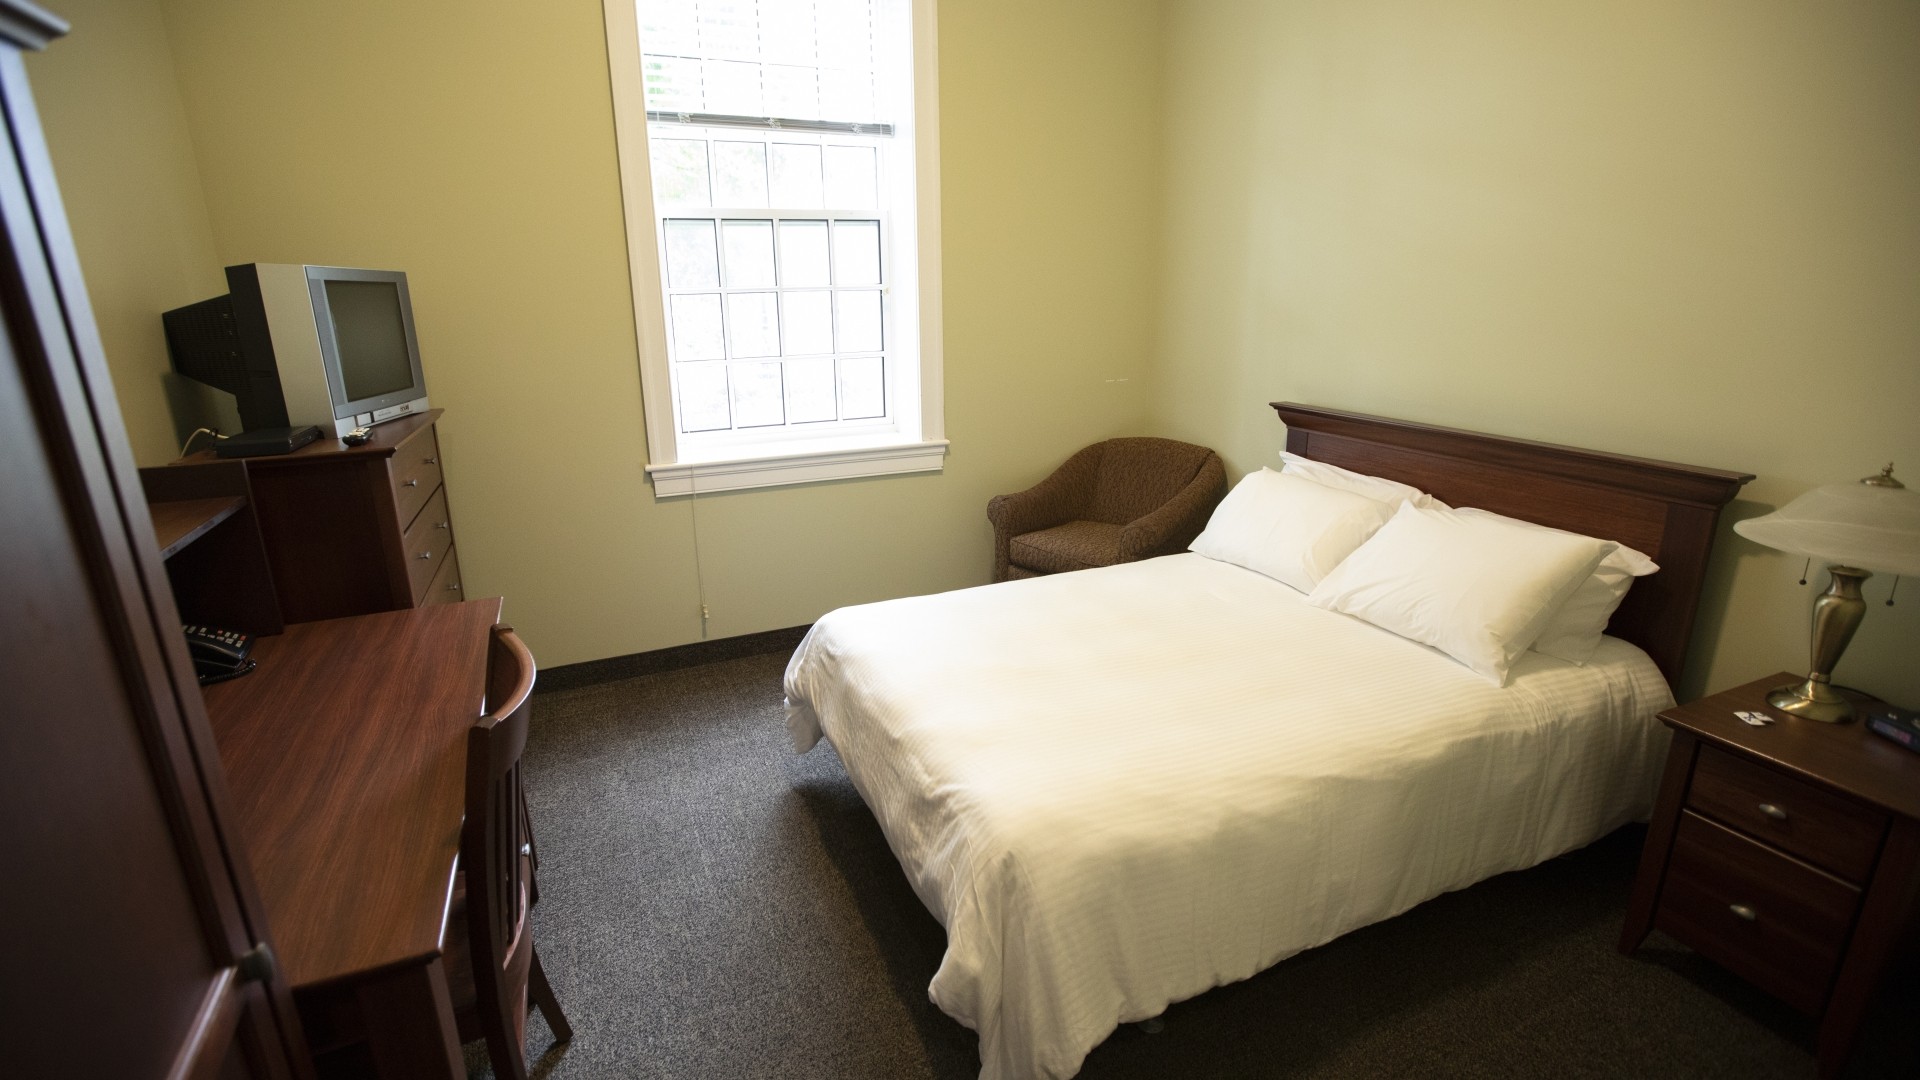 Single suite located in Governors Hall with a double bed, desk, TV, dresser and armchair.